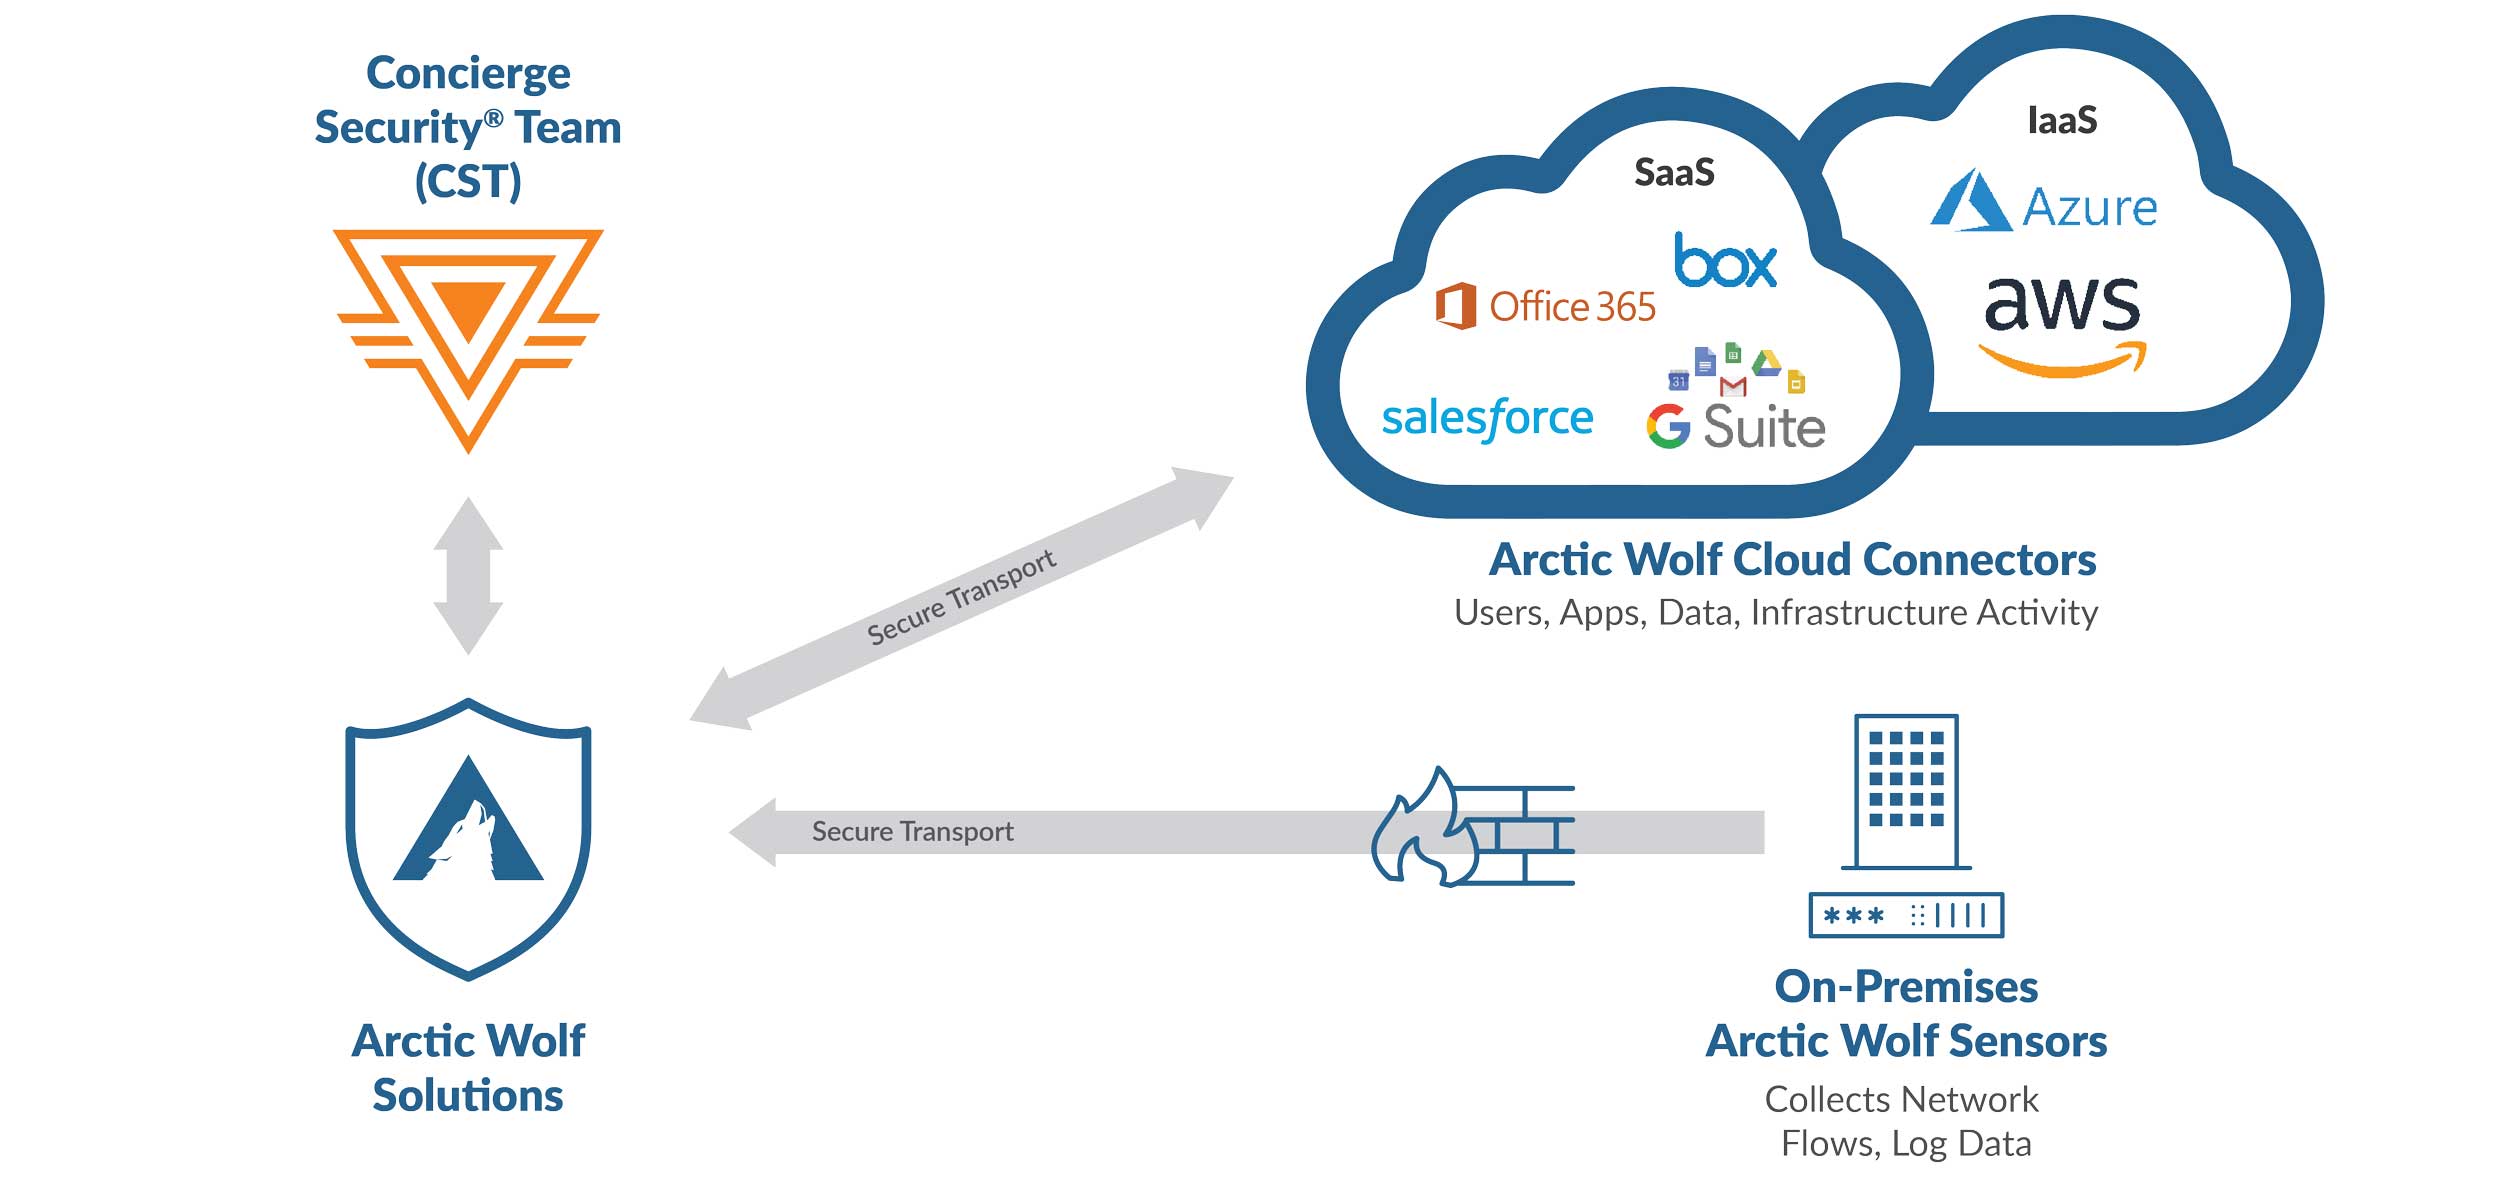 Concierge Security Team with graphic connecting to Arctic Wolf Solutions and secure transport to AW Cloud connectors and on-premises AW sensors